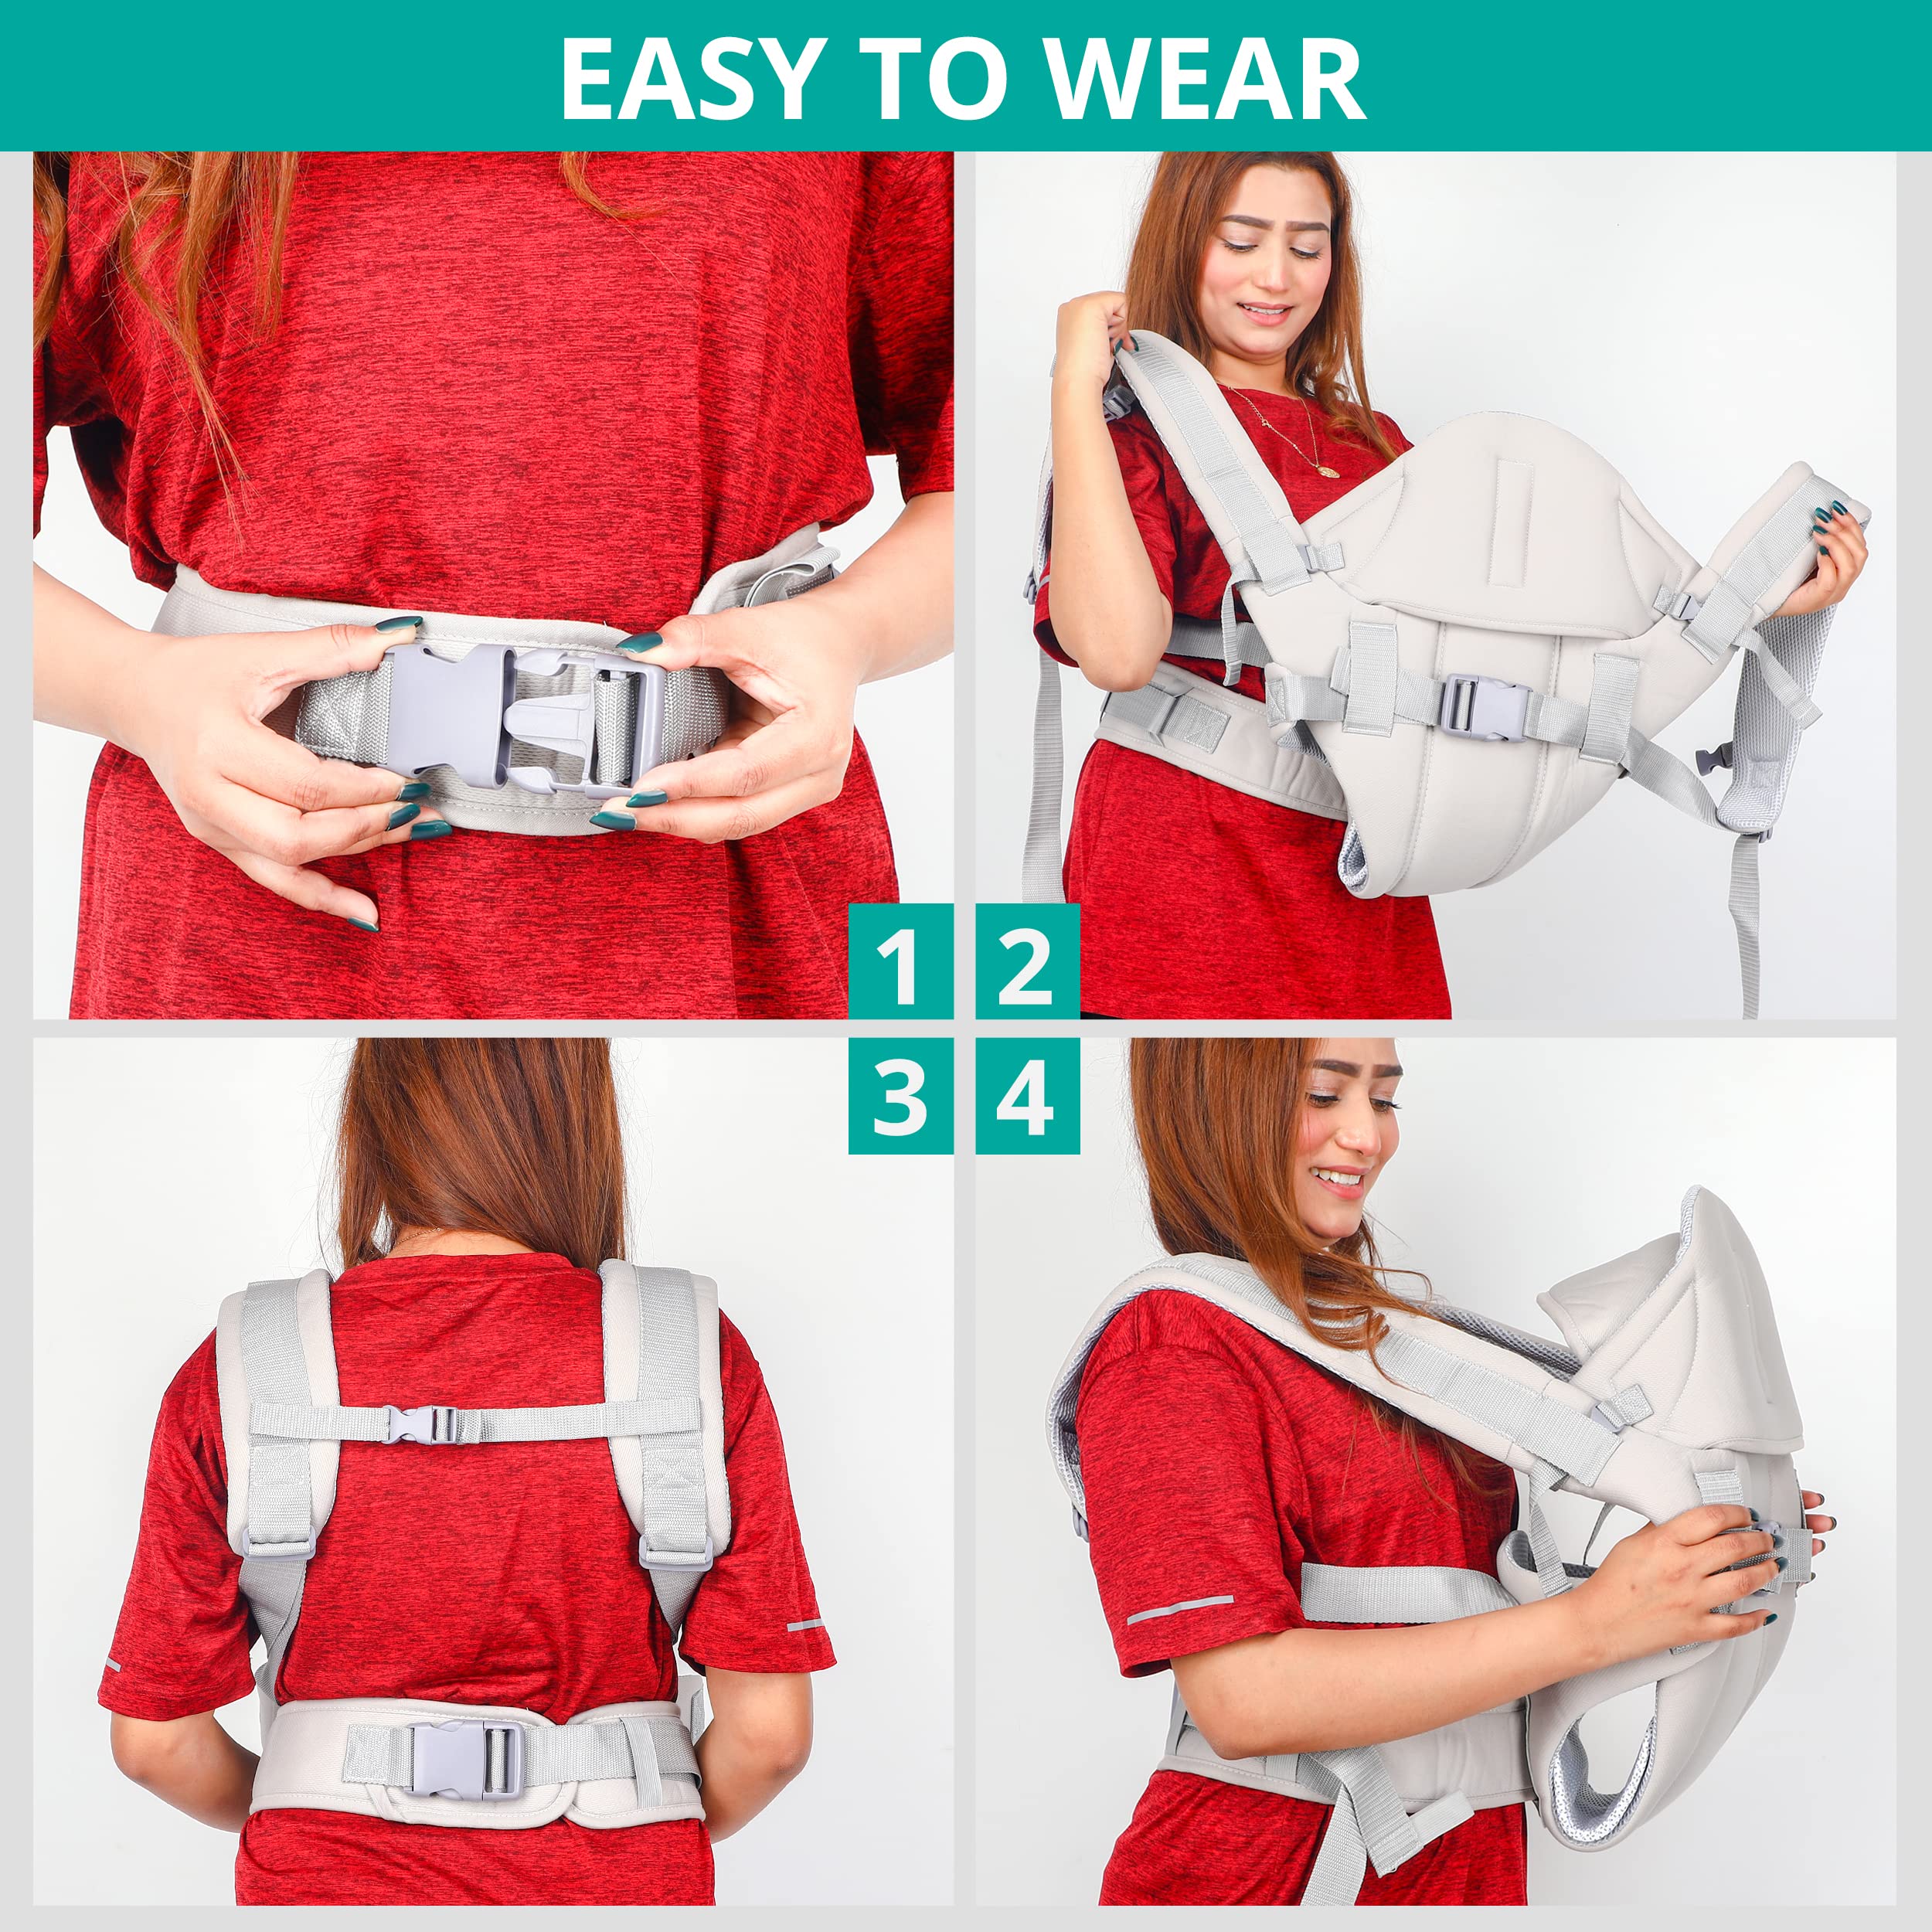 Reyobaby Baby Carrier Newborn to Toddler - Ergonomic & Adjustable Infant Carrier for Baby Wrap with Padded Head and Lumbar Support, Shoulder Straps & Cool Air Mesh Baby Holder (7-40 Lb), Grey